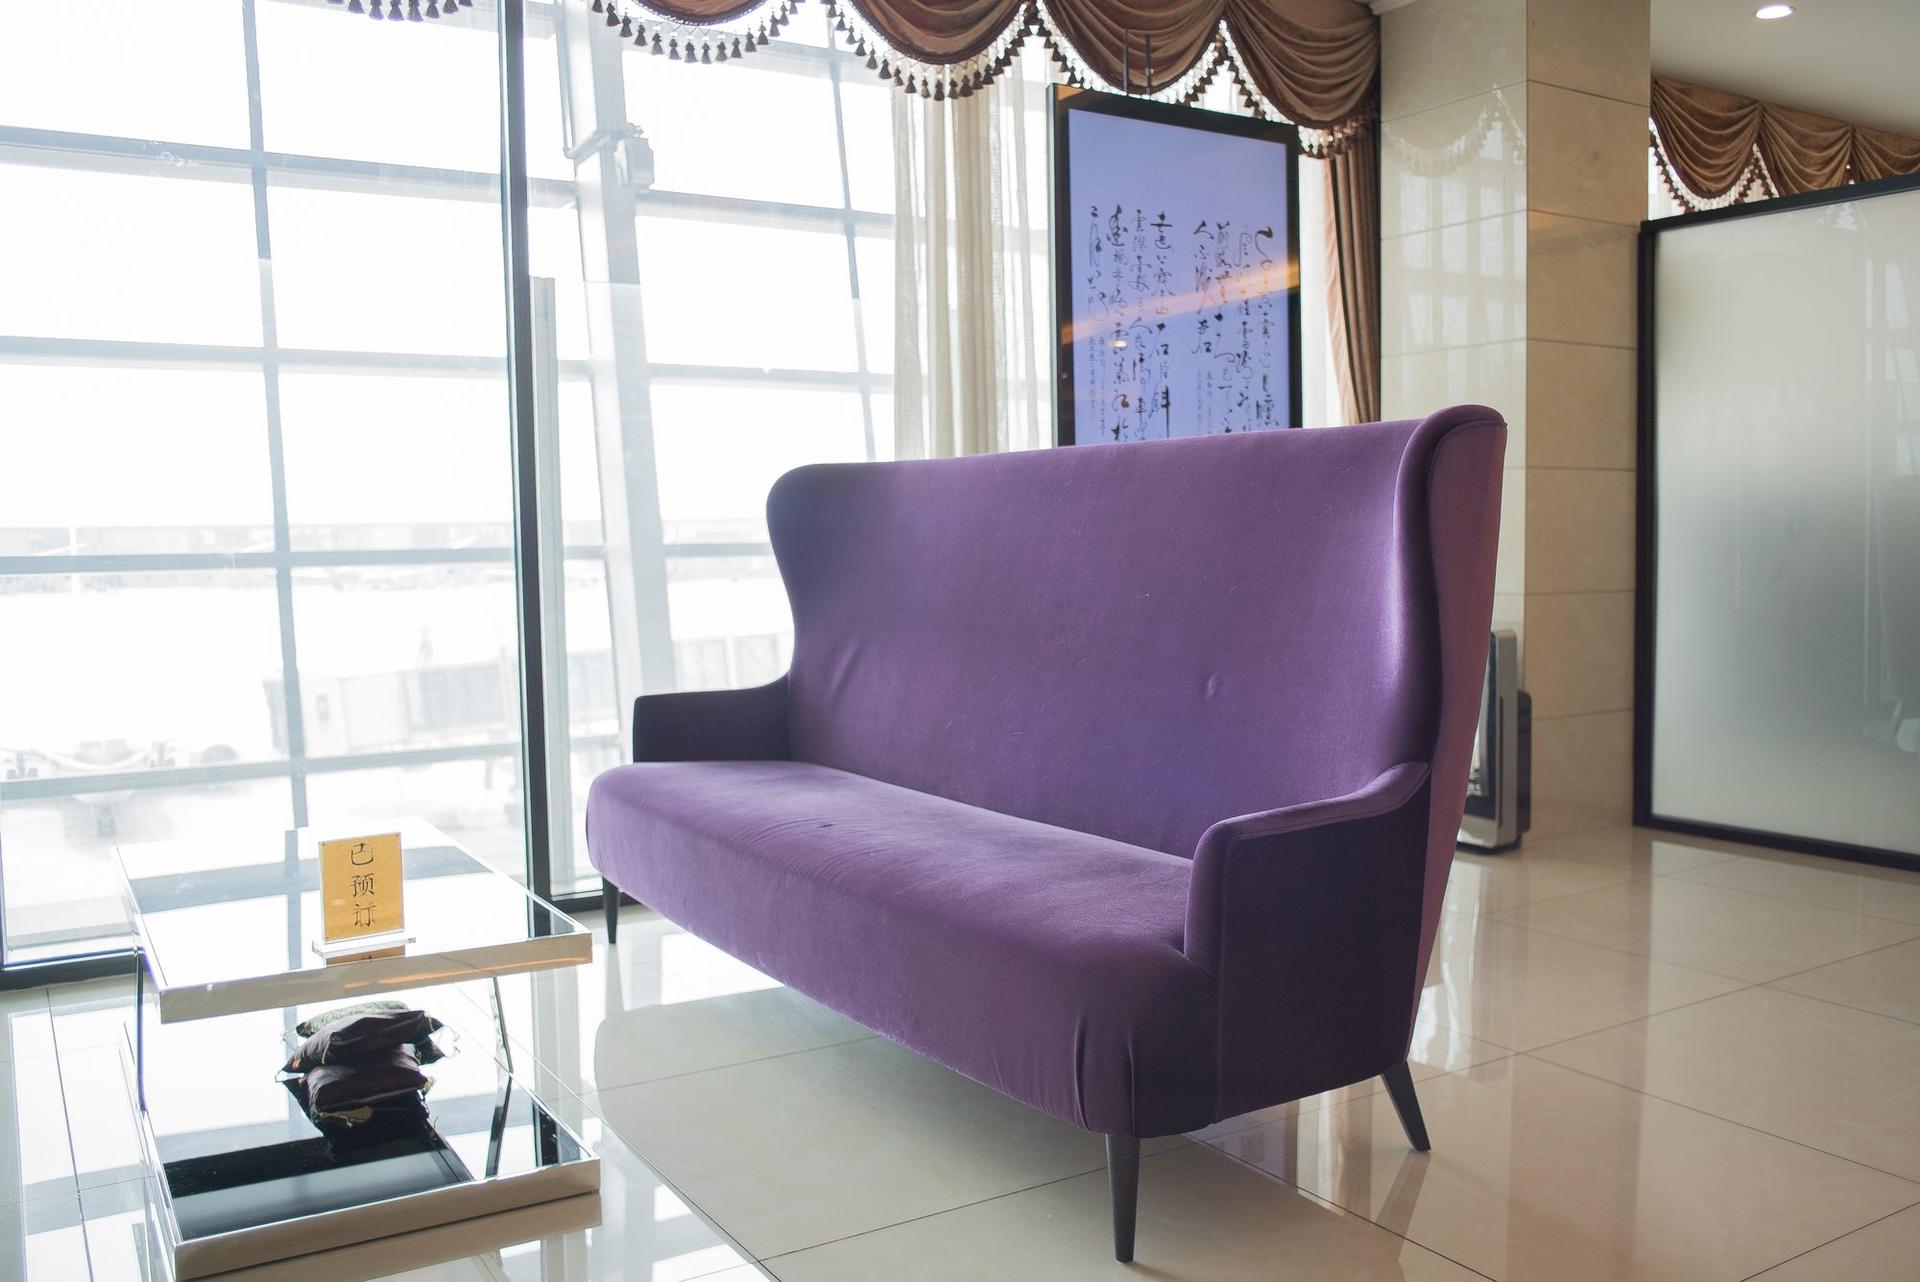 Tianjin Airlines Lounge image 9 of 13